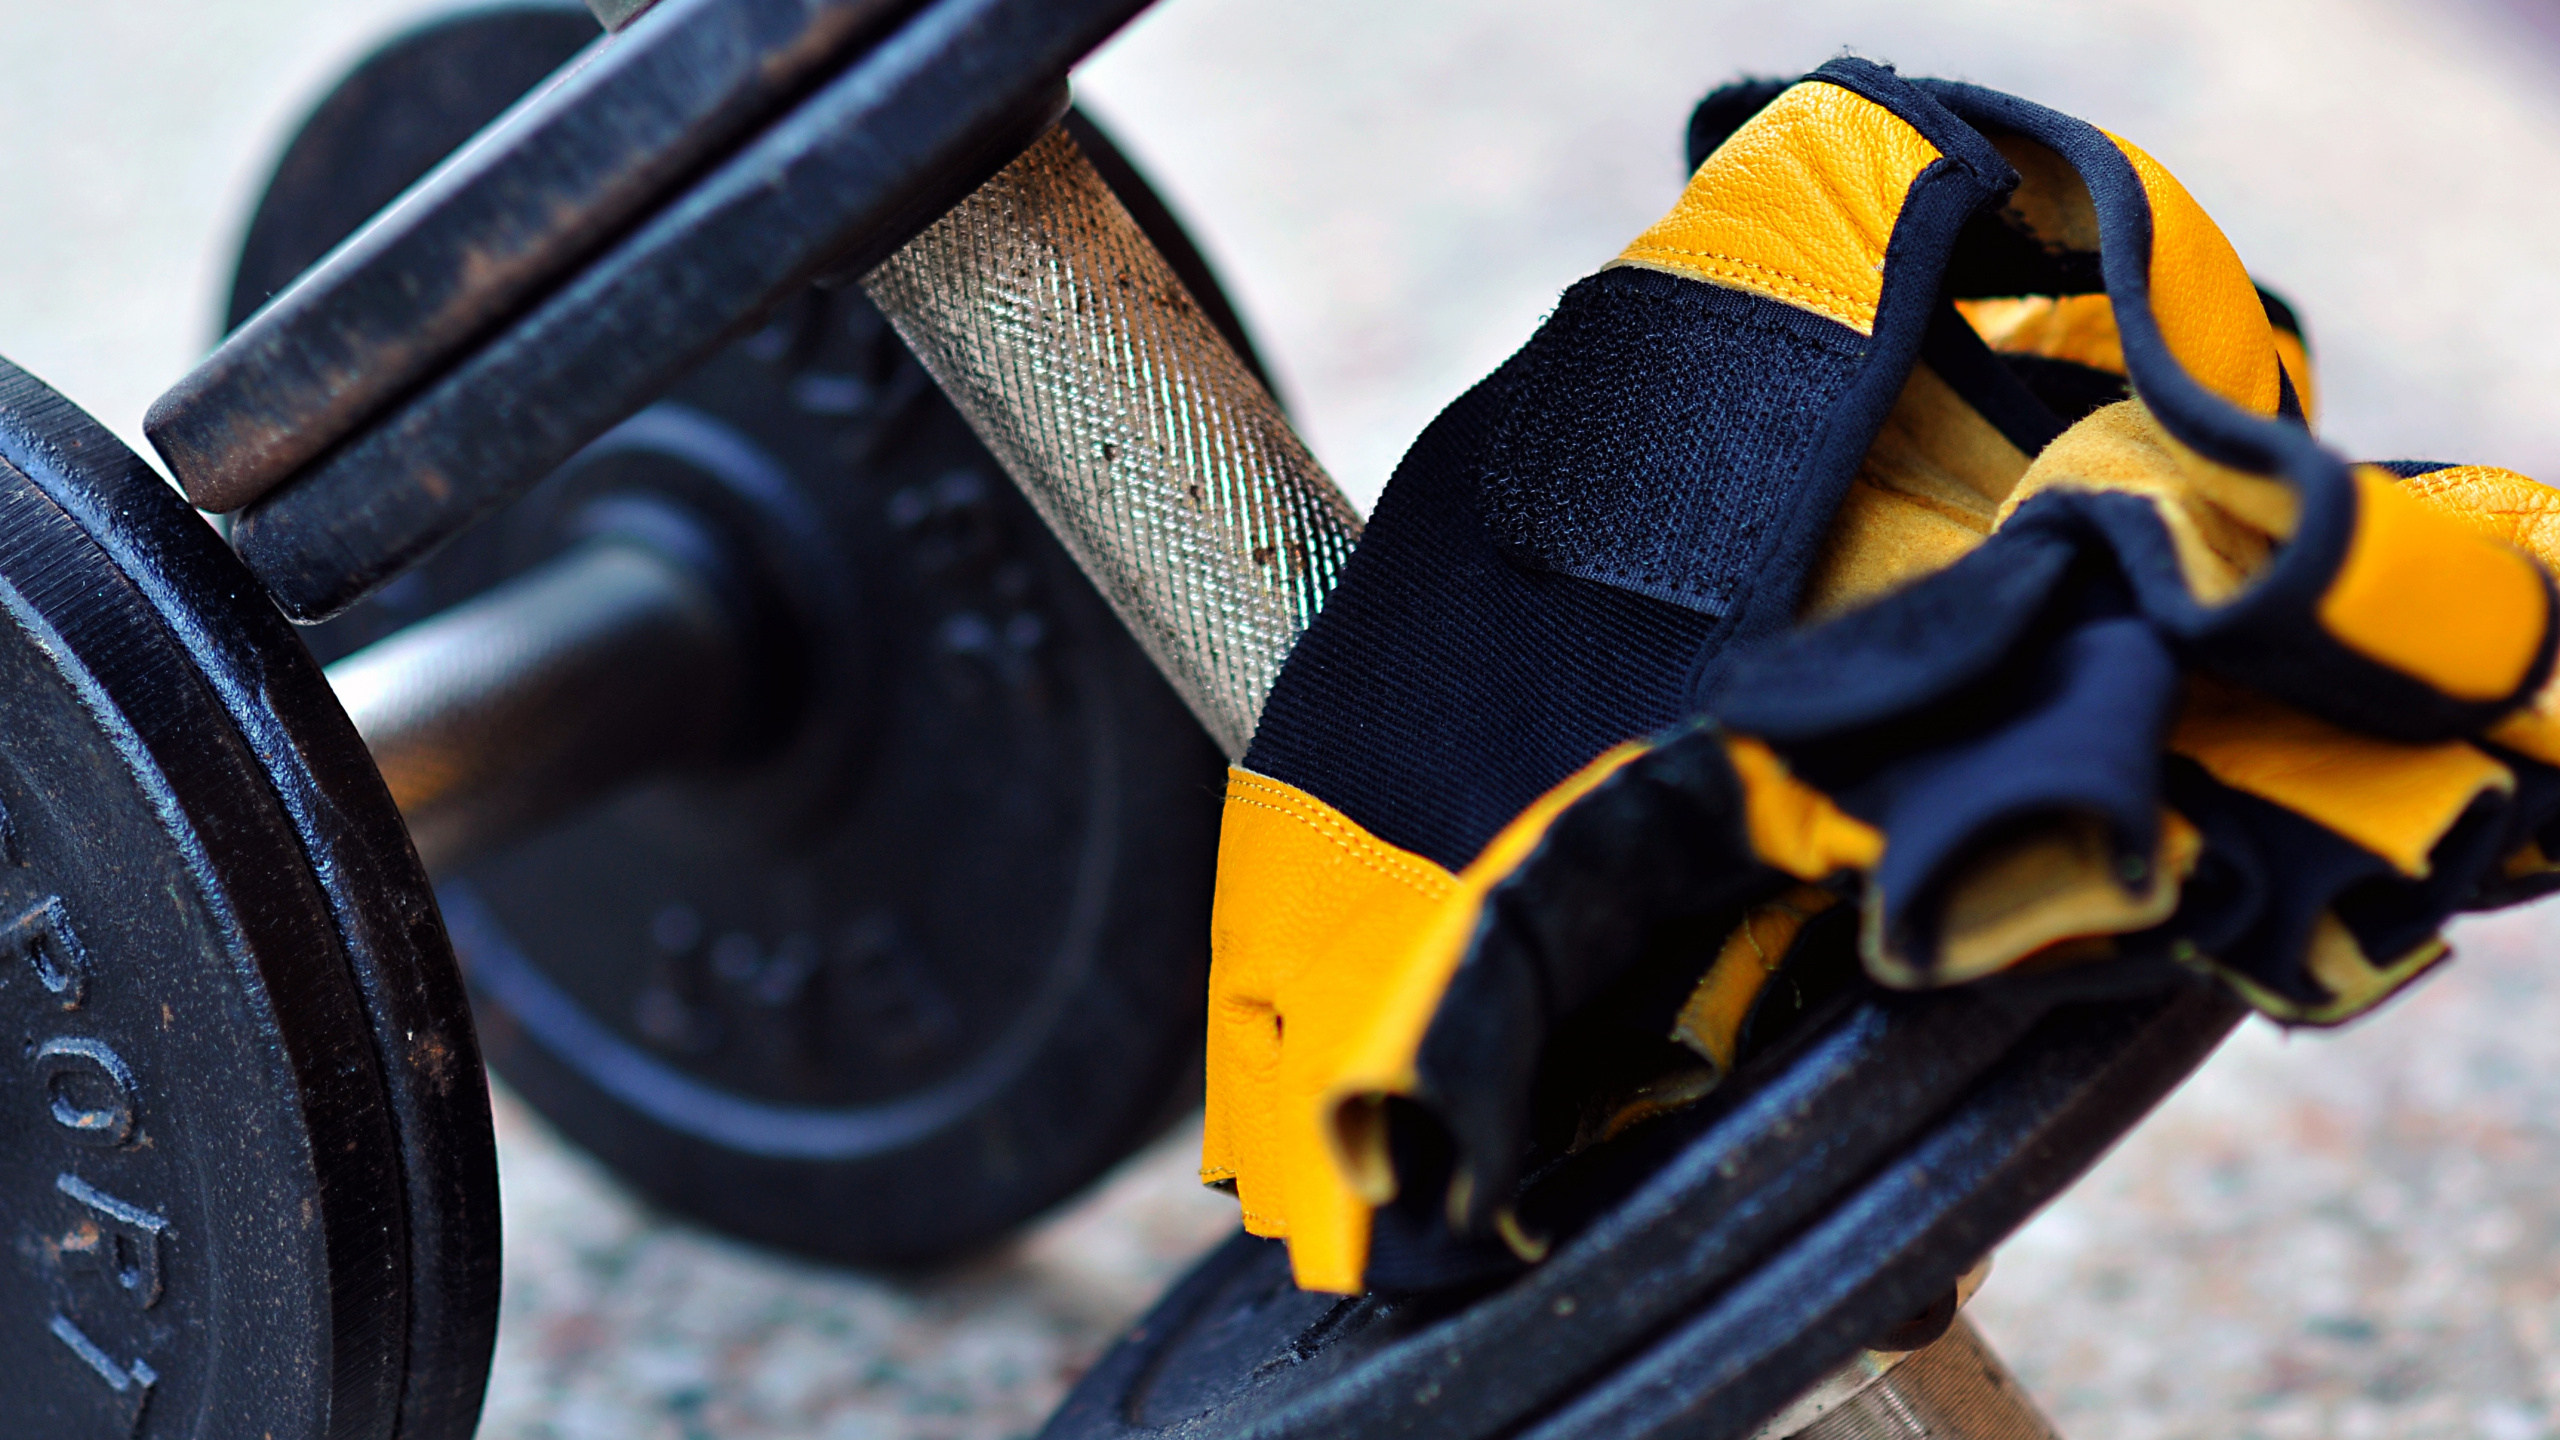 Black and Yellow Dumbbell on Gray Concrete Floor. Wallpaper in 2560x1440 Resolution